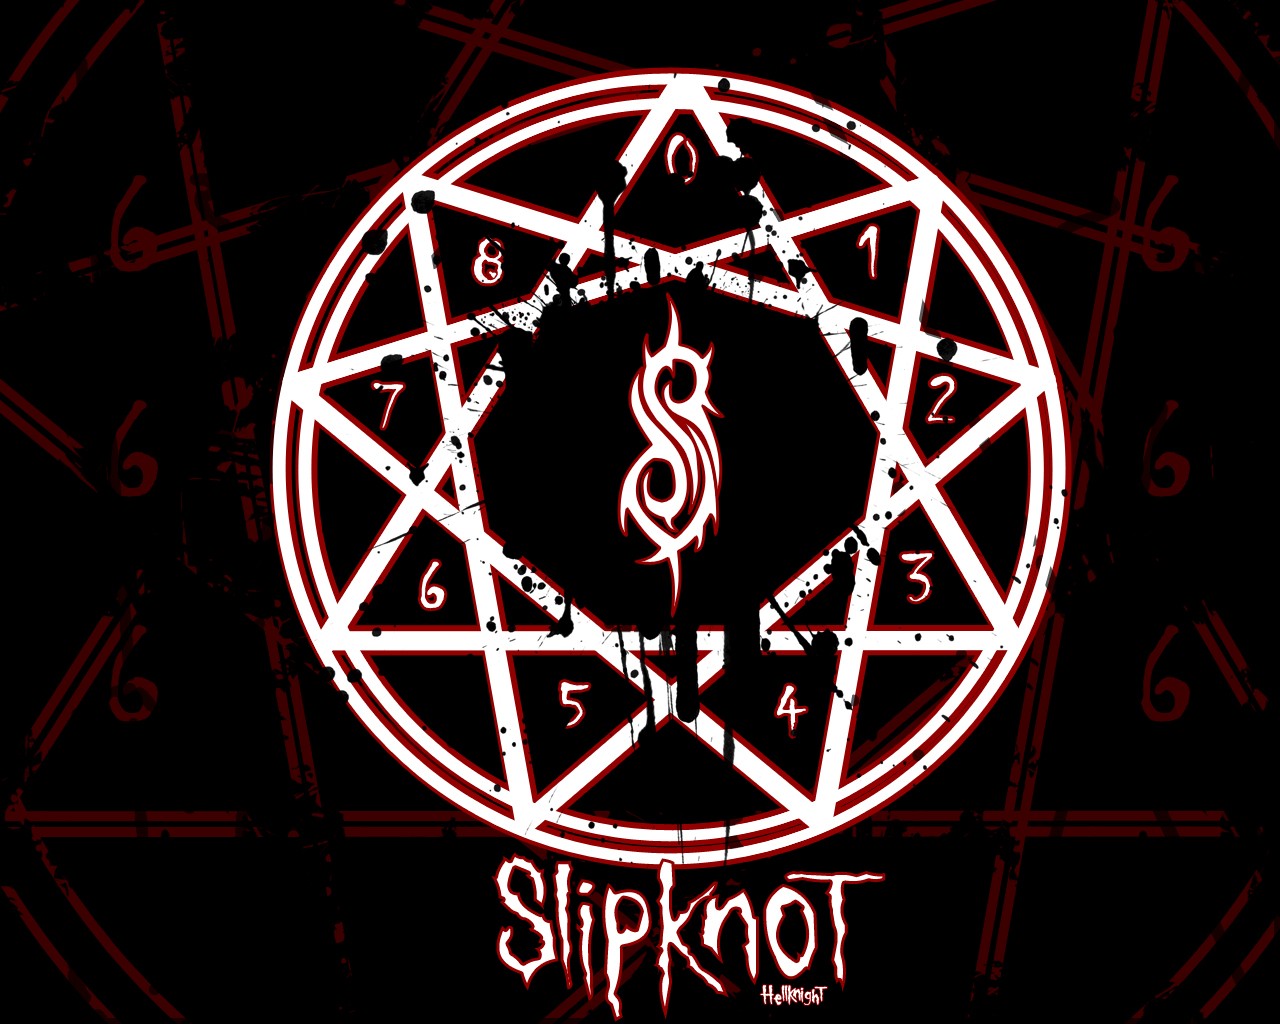 General 1280x1024 Slipknot numbers music band